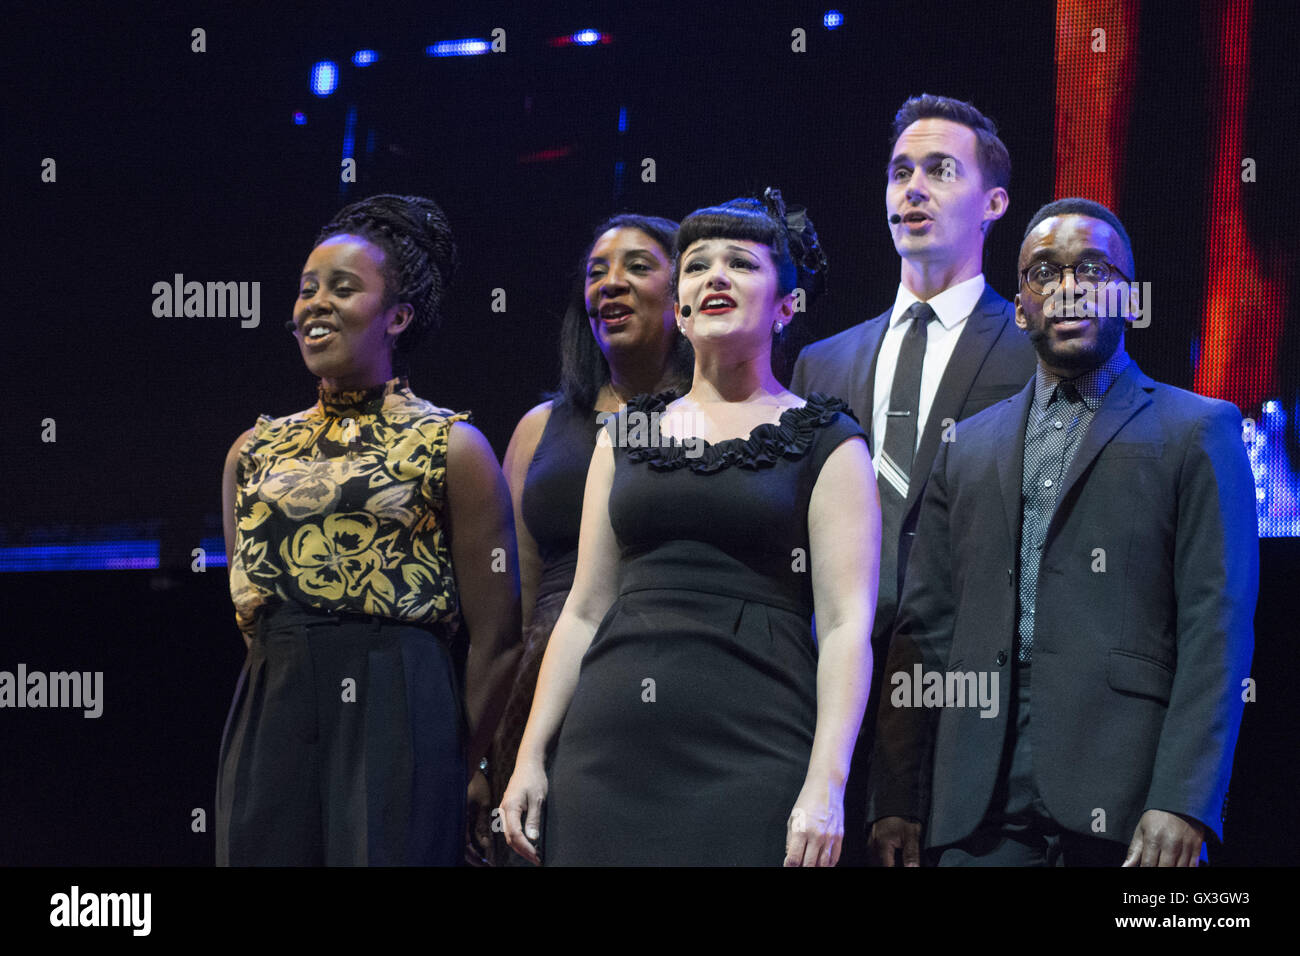 Chicago, IL, USA. 14th Sep, 2016. The Fifth Star Awards honors people who have contributed to the arts and culture of Chicago and beyond. This year's presentation took place at the Pritzker Pavillion in Millennium Park in downtown Chicago.The honorees were Second City, legendary sketch and comedy center; Jackie Taylor, actress, educator and founder of the Black Ensemble Theater; Victor Skrebneski, celebrated photographer; Carlos Tortolero, educator and founder of the Museum of Mexican Art and Buddy Guy, legendary Blues musician. The Rising Star Award was presented to Jocelyn Camille L Stock Photo